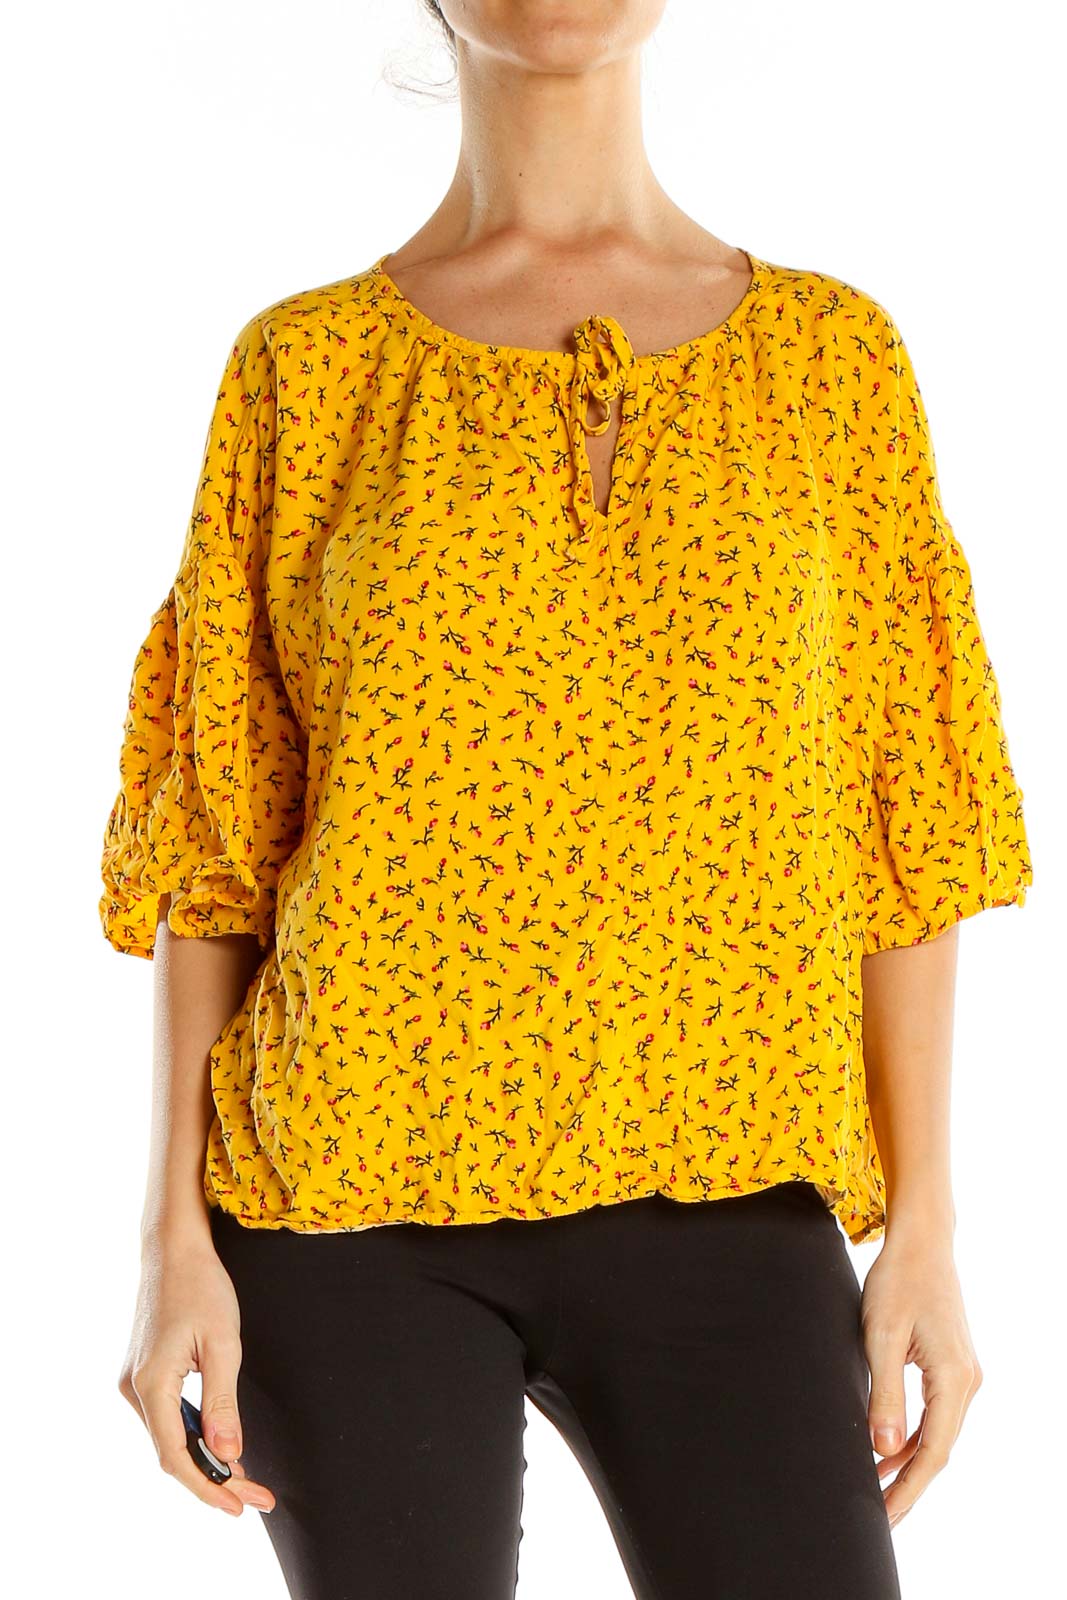 Yellow Floral Print Brunch Top Front